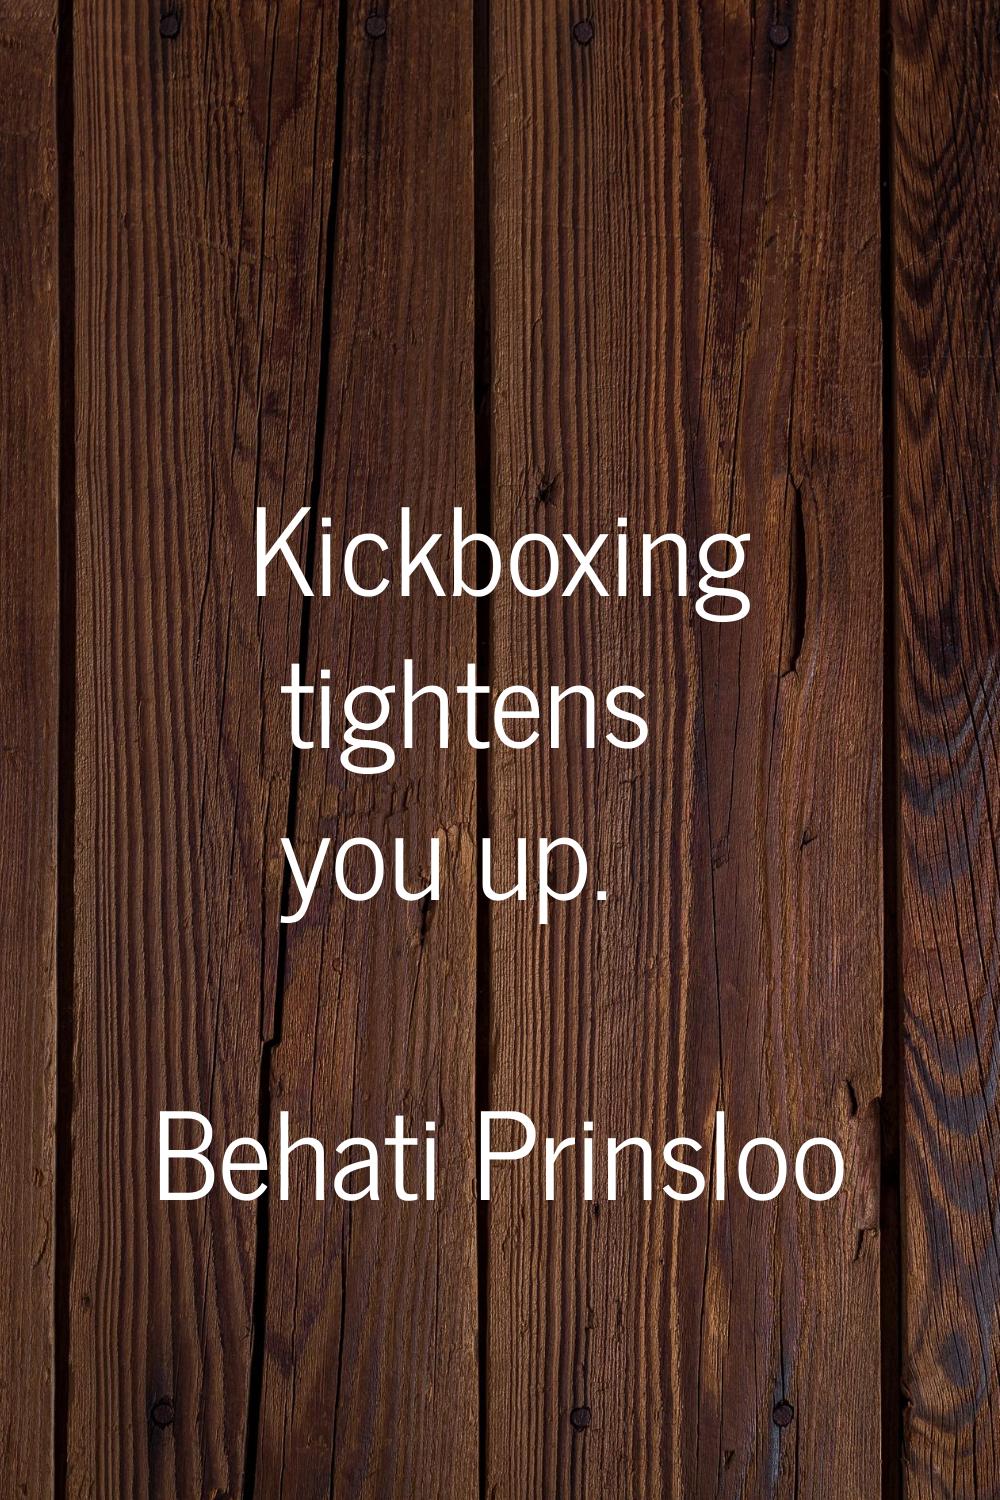 Kickboxing tightens you up.